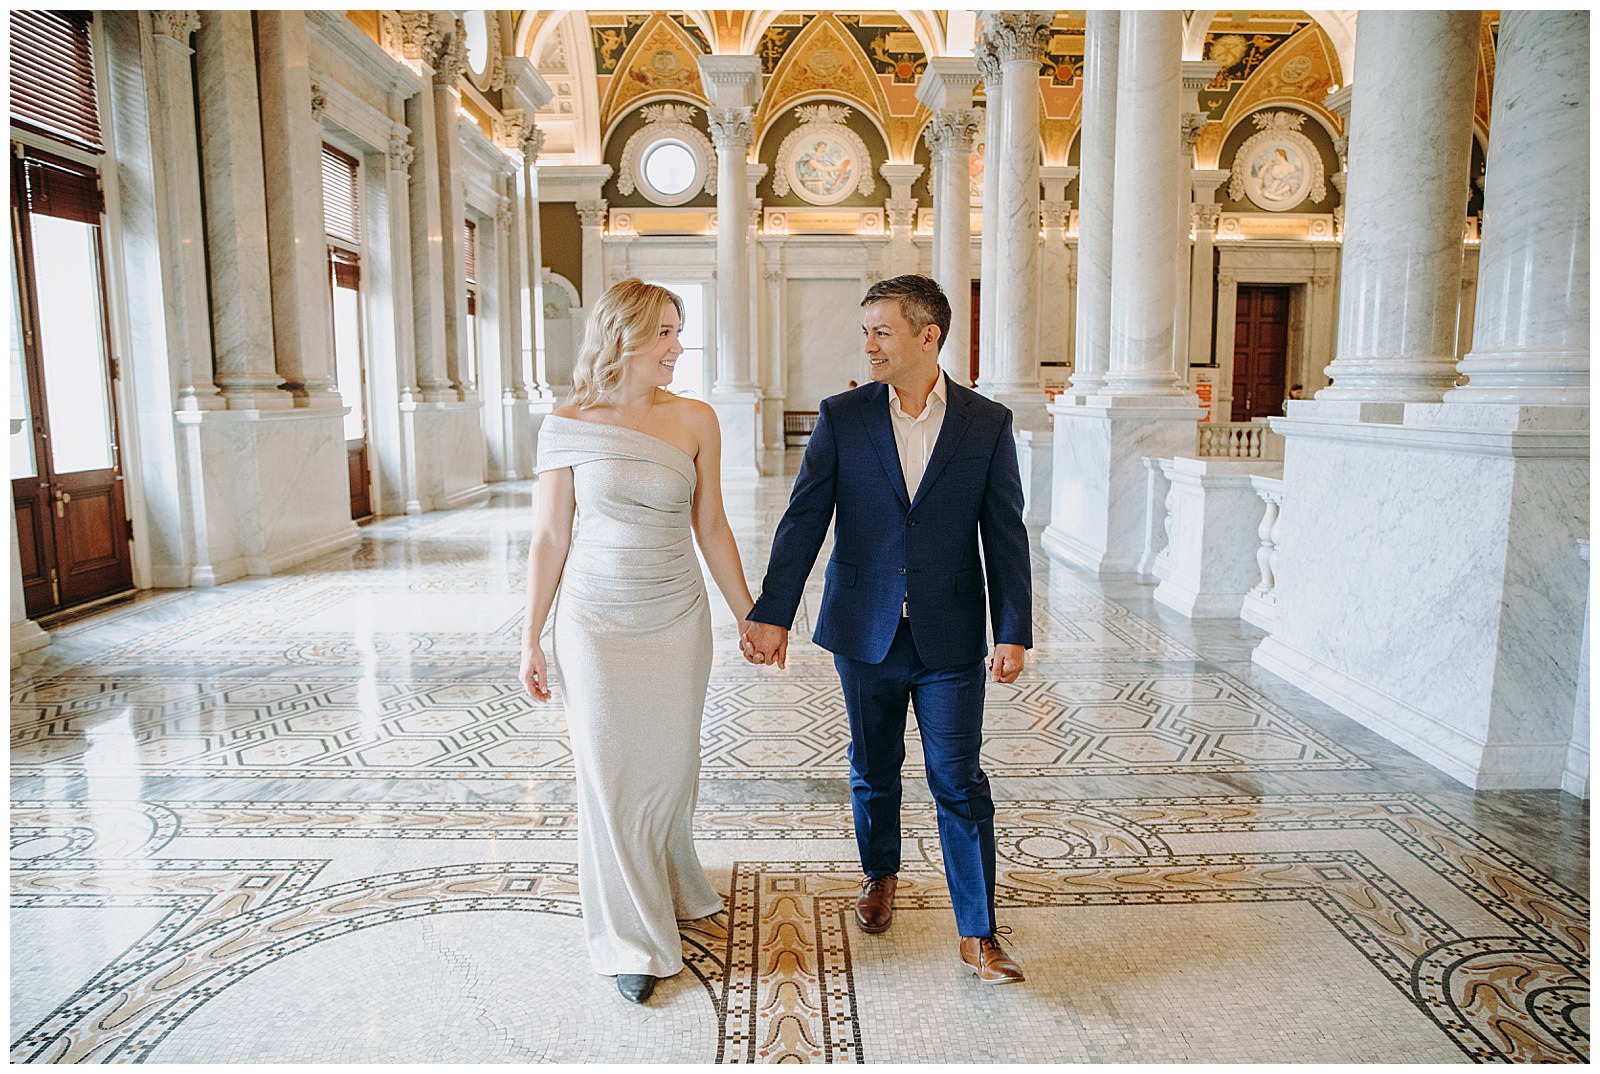 Library of Congress Engagement Photos couple walking together